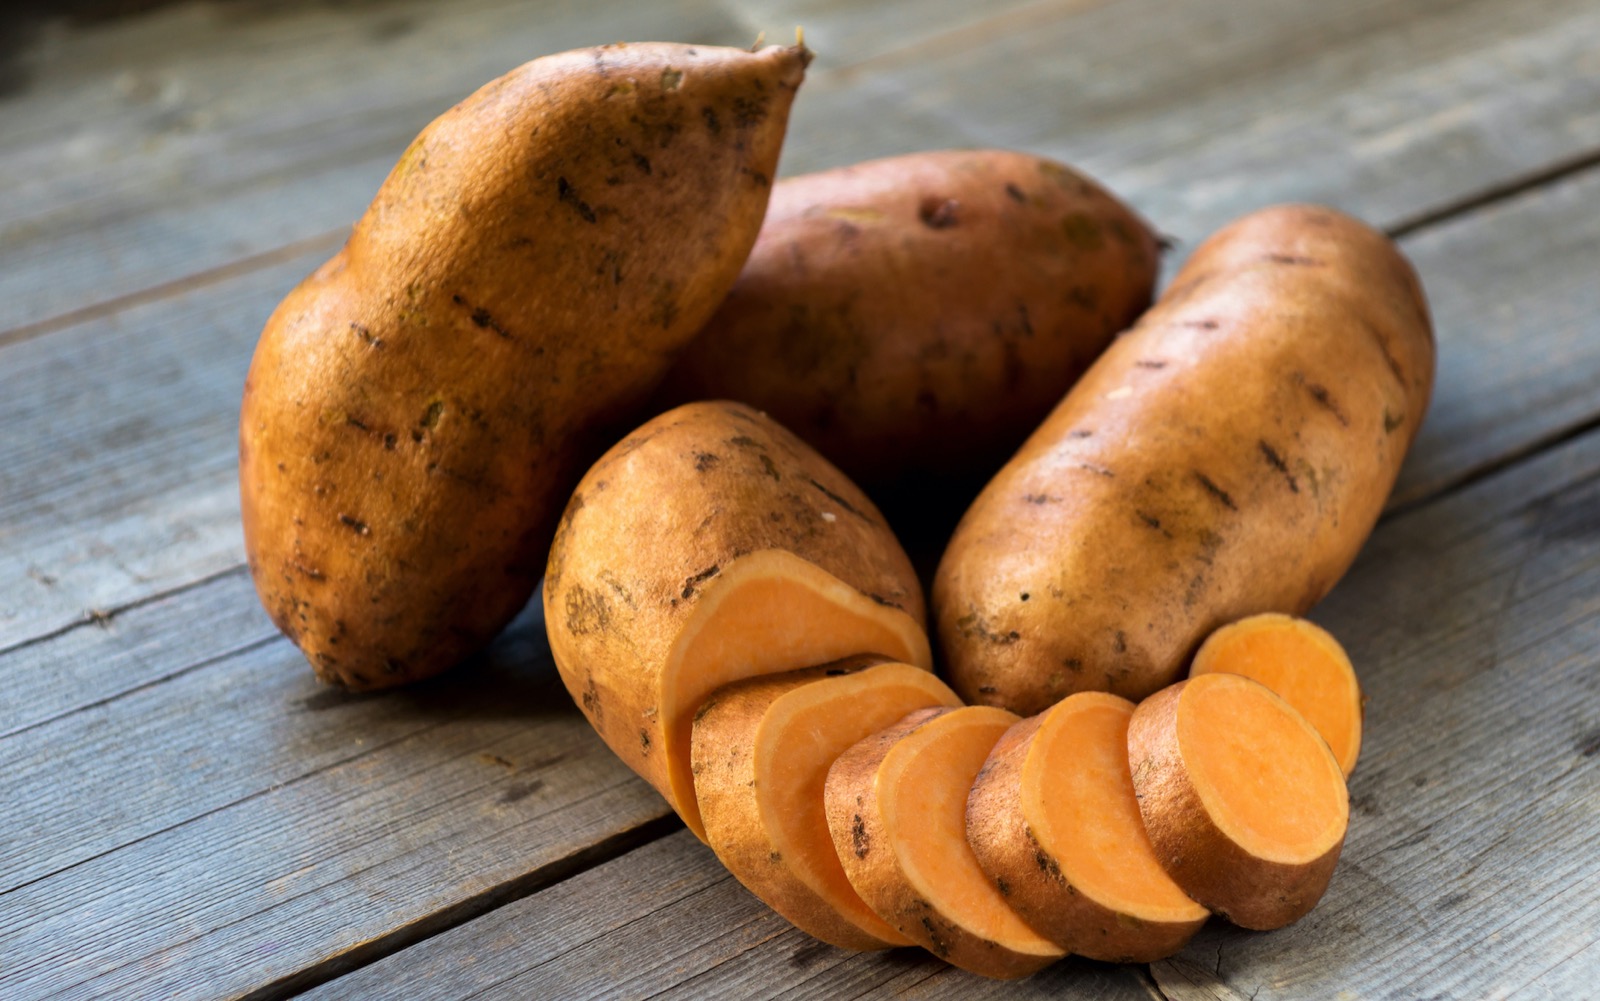 The Snacks You Love and the Veggies You Hate Will Determine Your Age With Alarming Accuracy Sweet potatoes